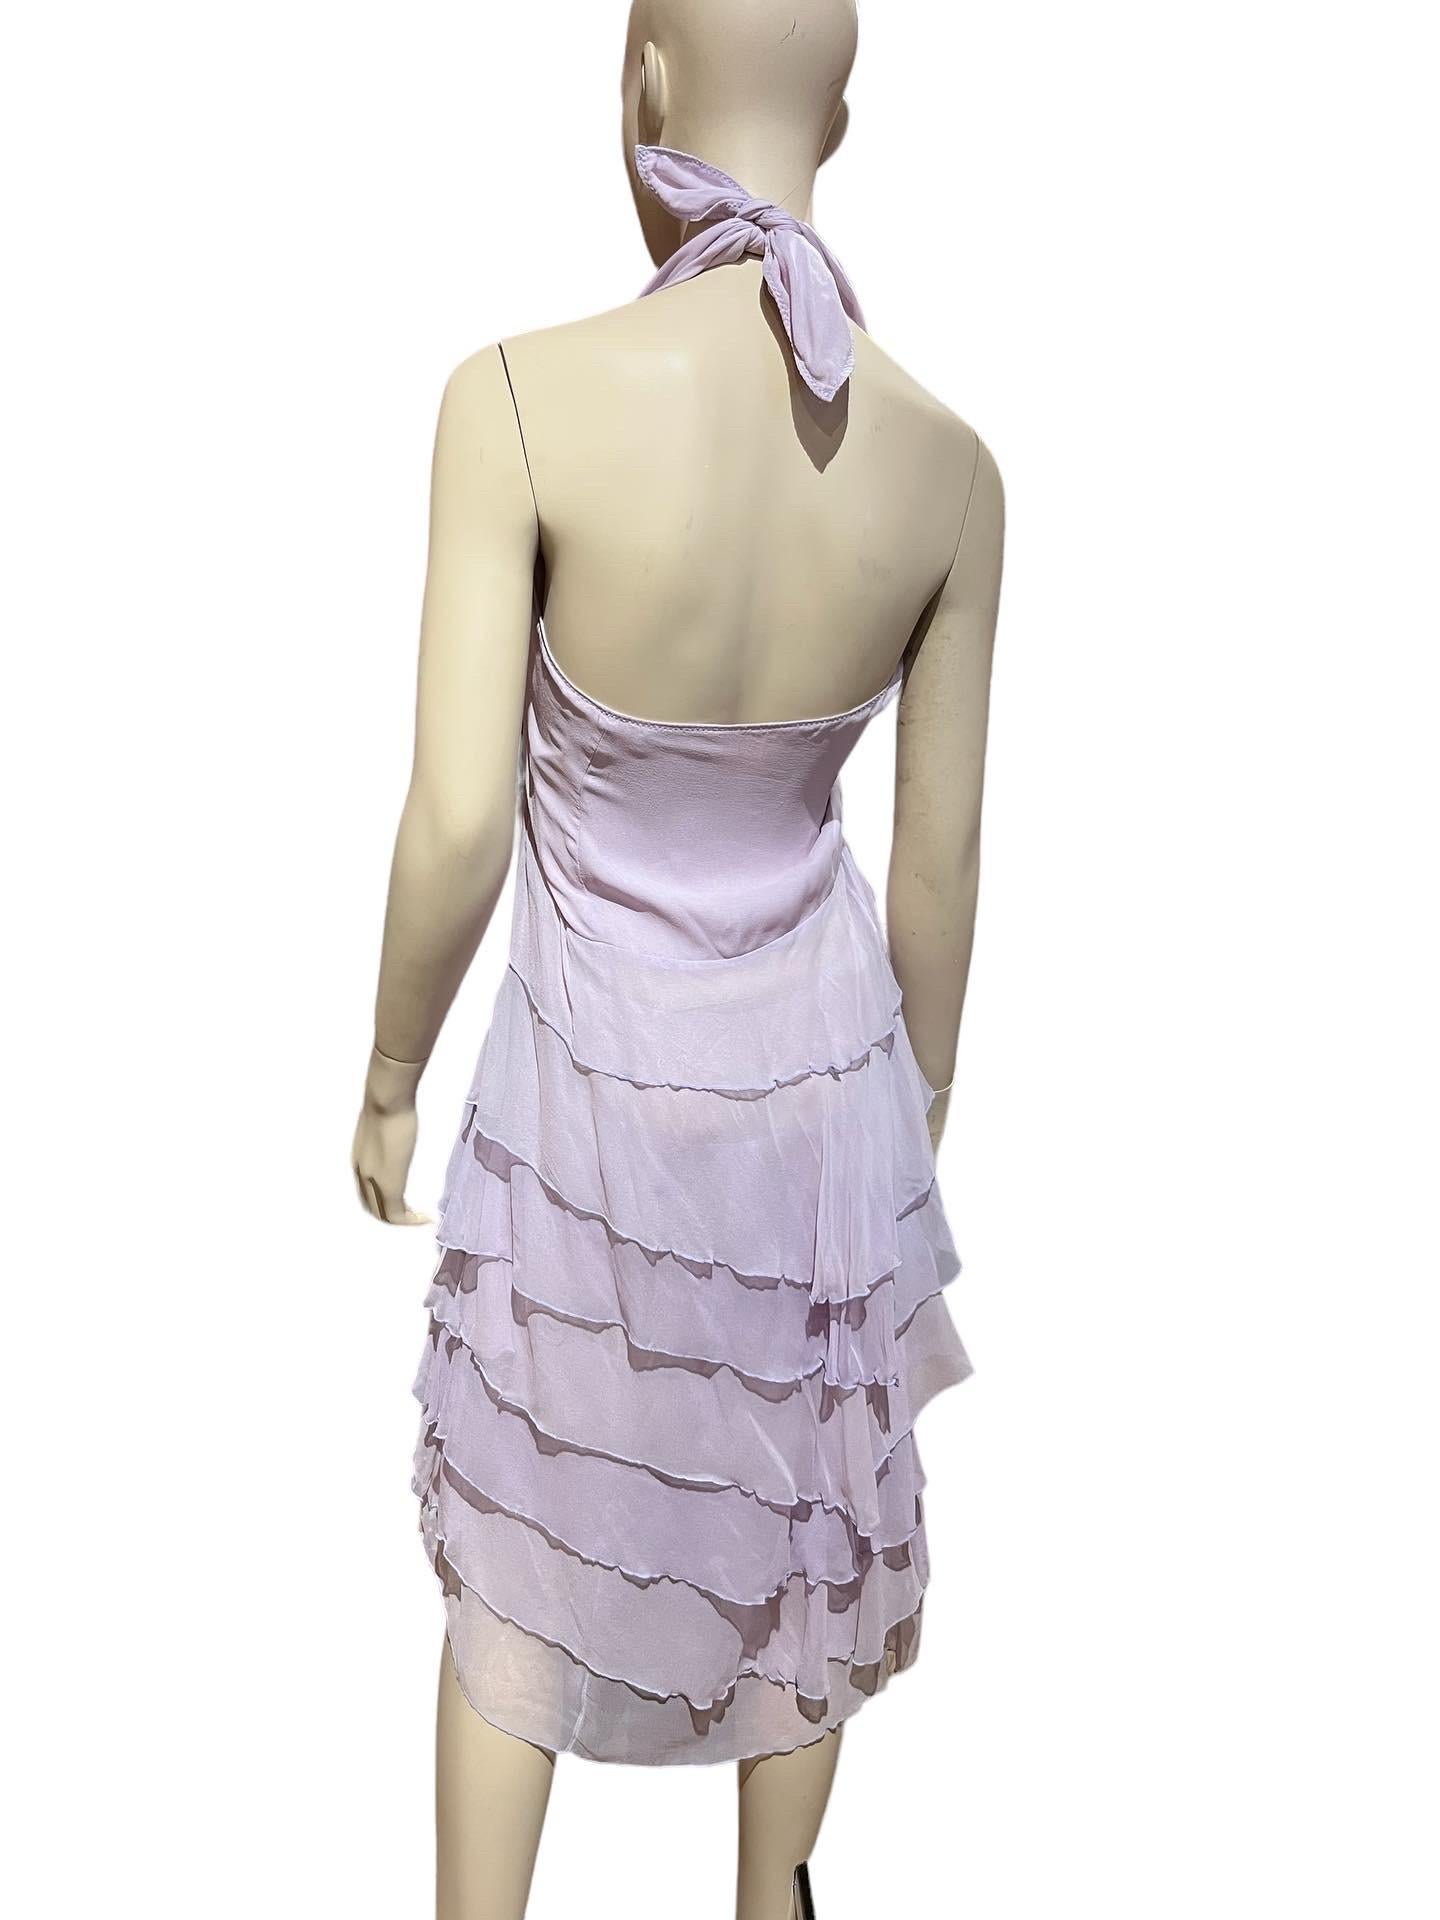 Y2K Stephen Burrows Silk Chiffon Lilac Layered Ruffled Halter Dress  In Good Condition For Sale In Greenport, NY